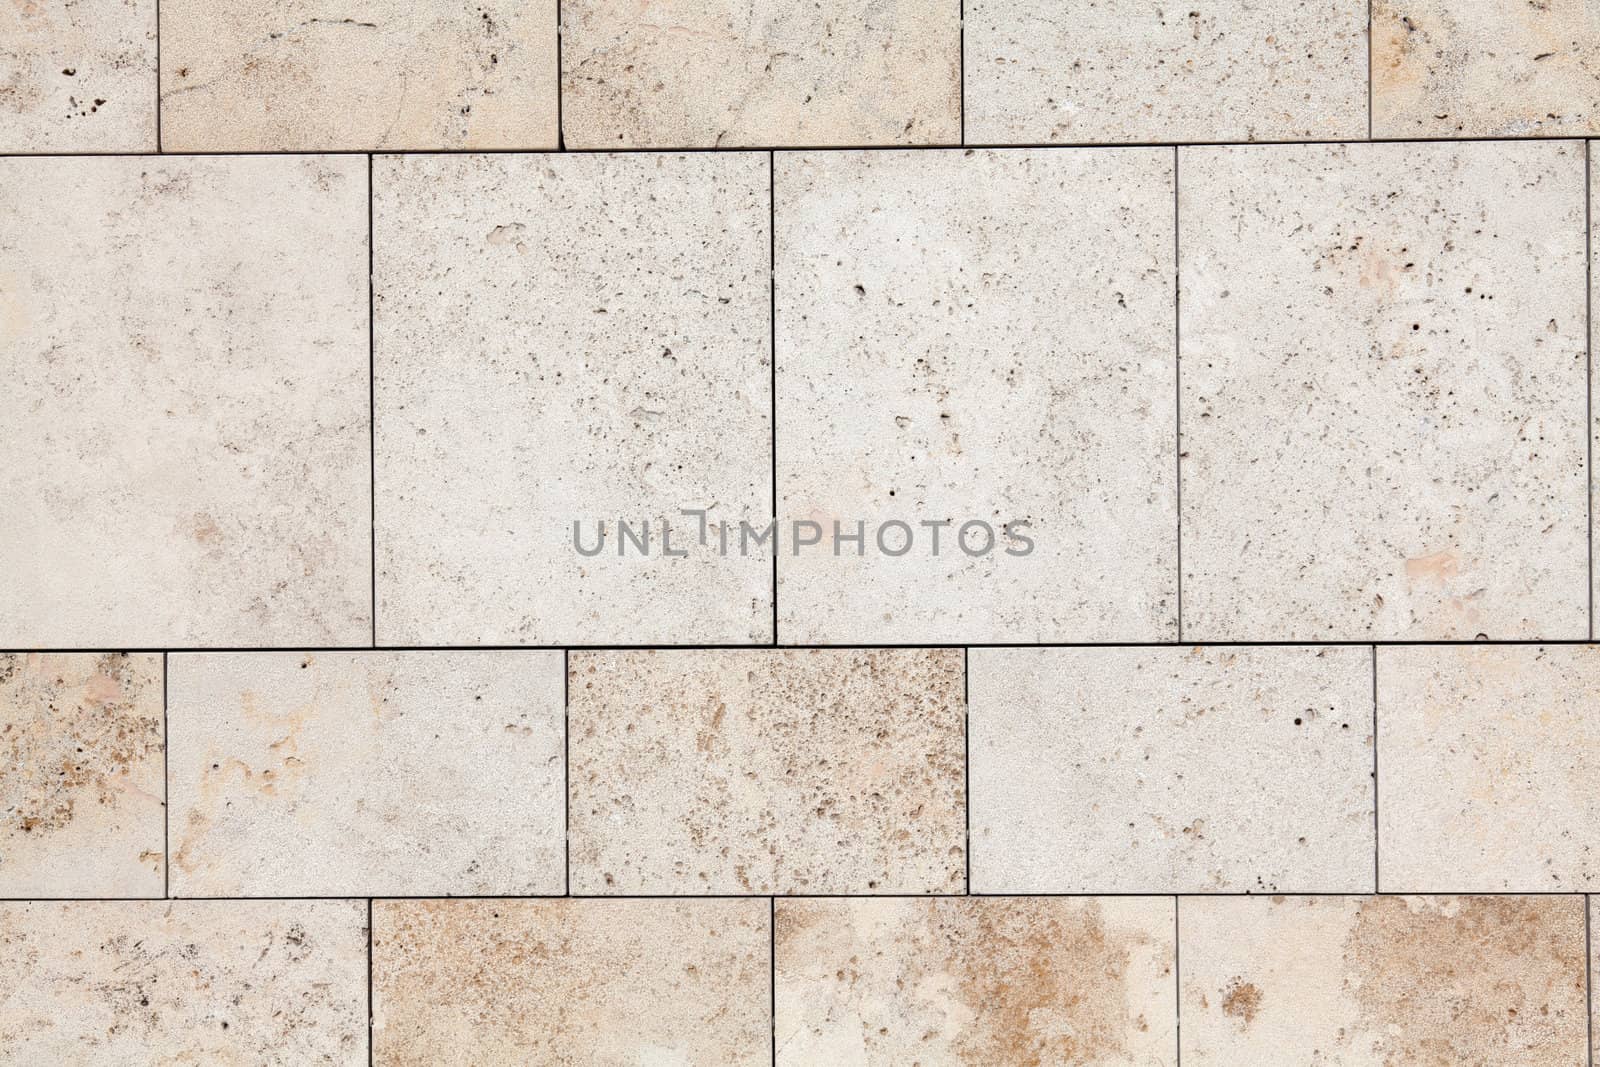 Marble wall tile laid in a brick pattern, ideal as a background